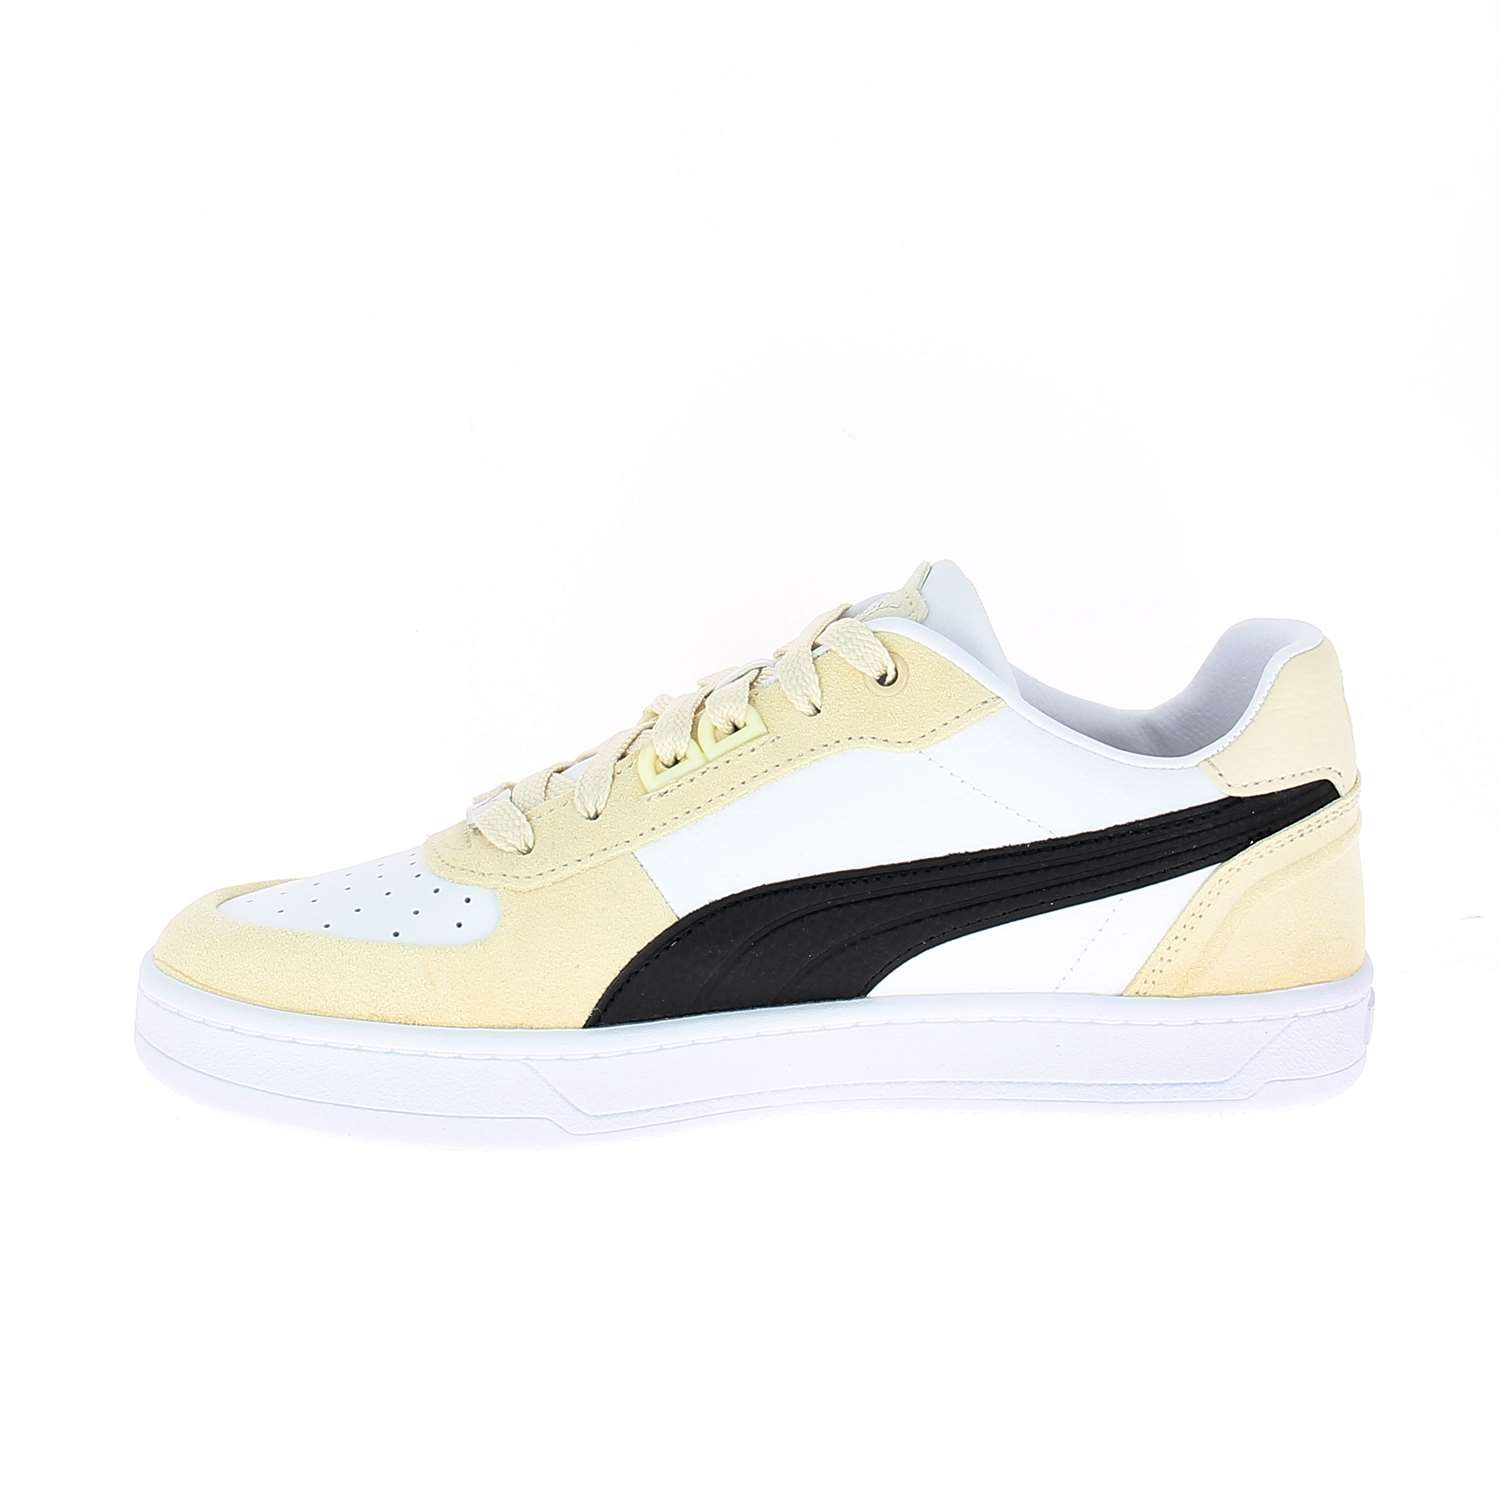 03 - CAVEN 2 LUXE - PUMA -  - Synthétique